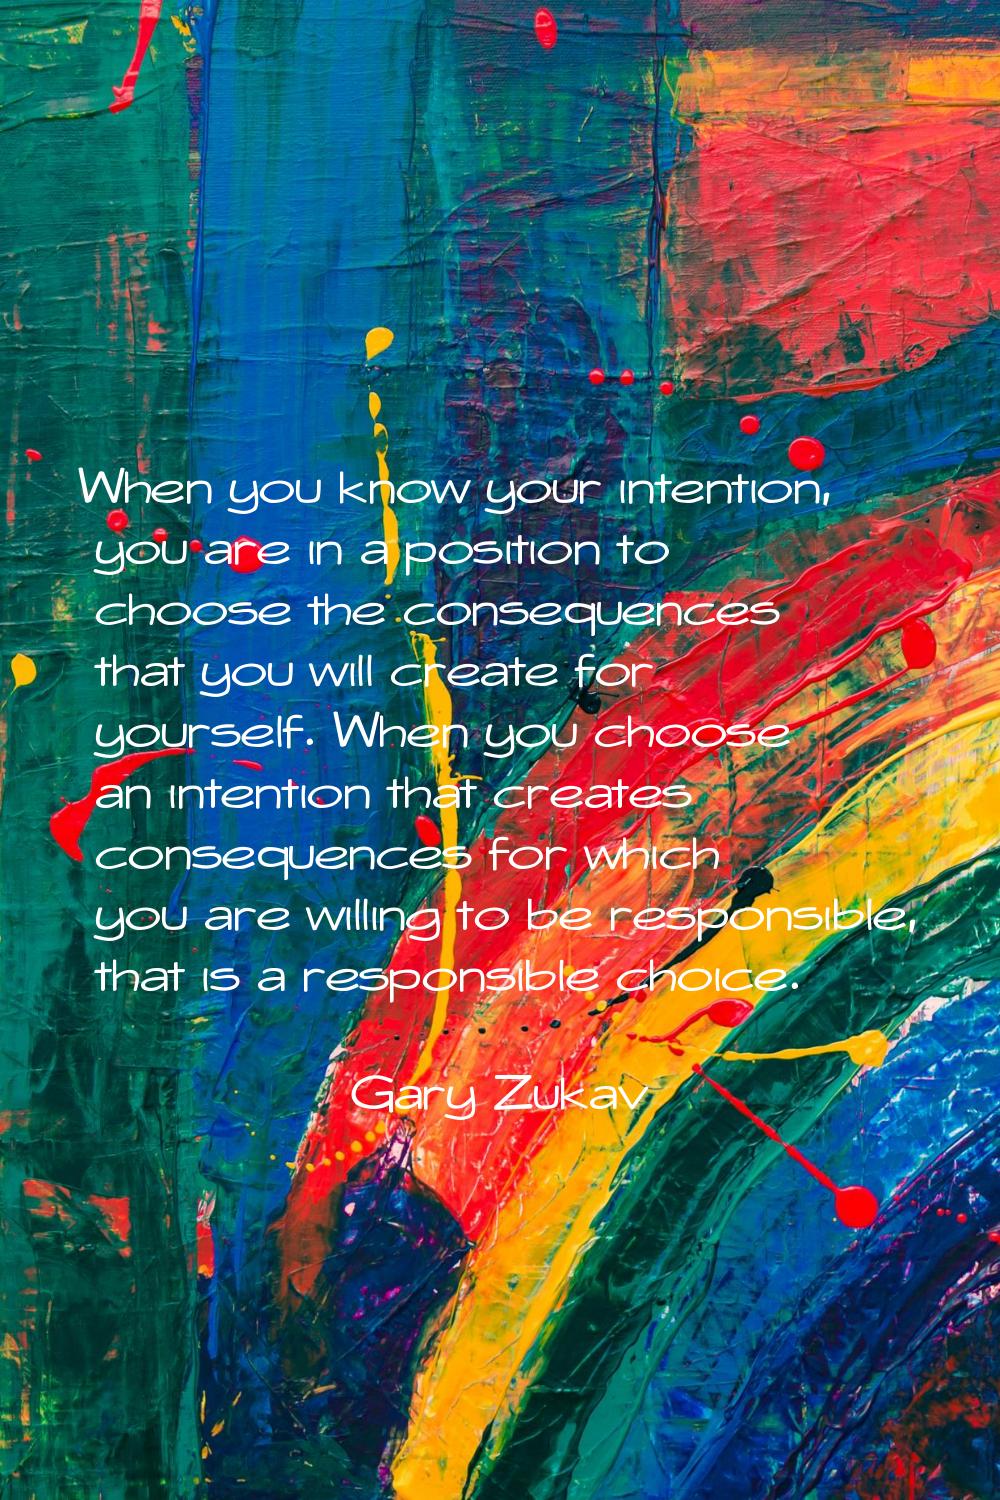 When you know your intention, you are in a position to choose the consequences that you will create